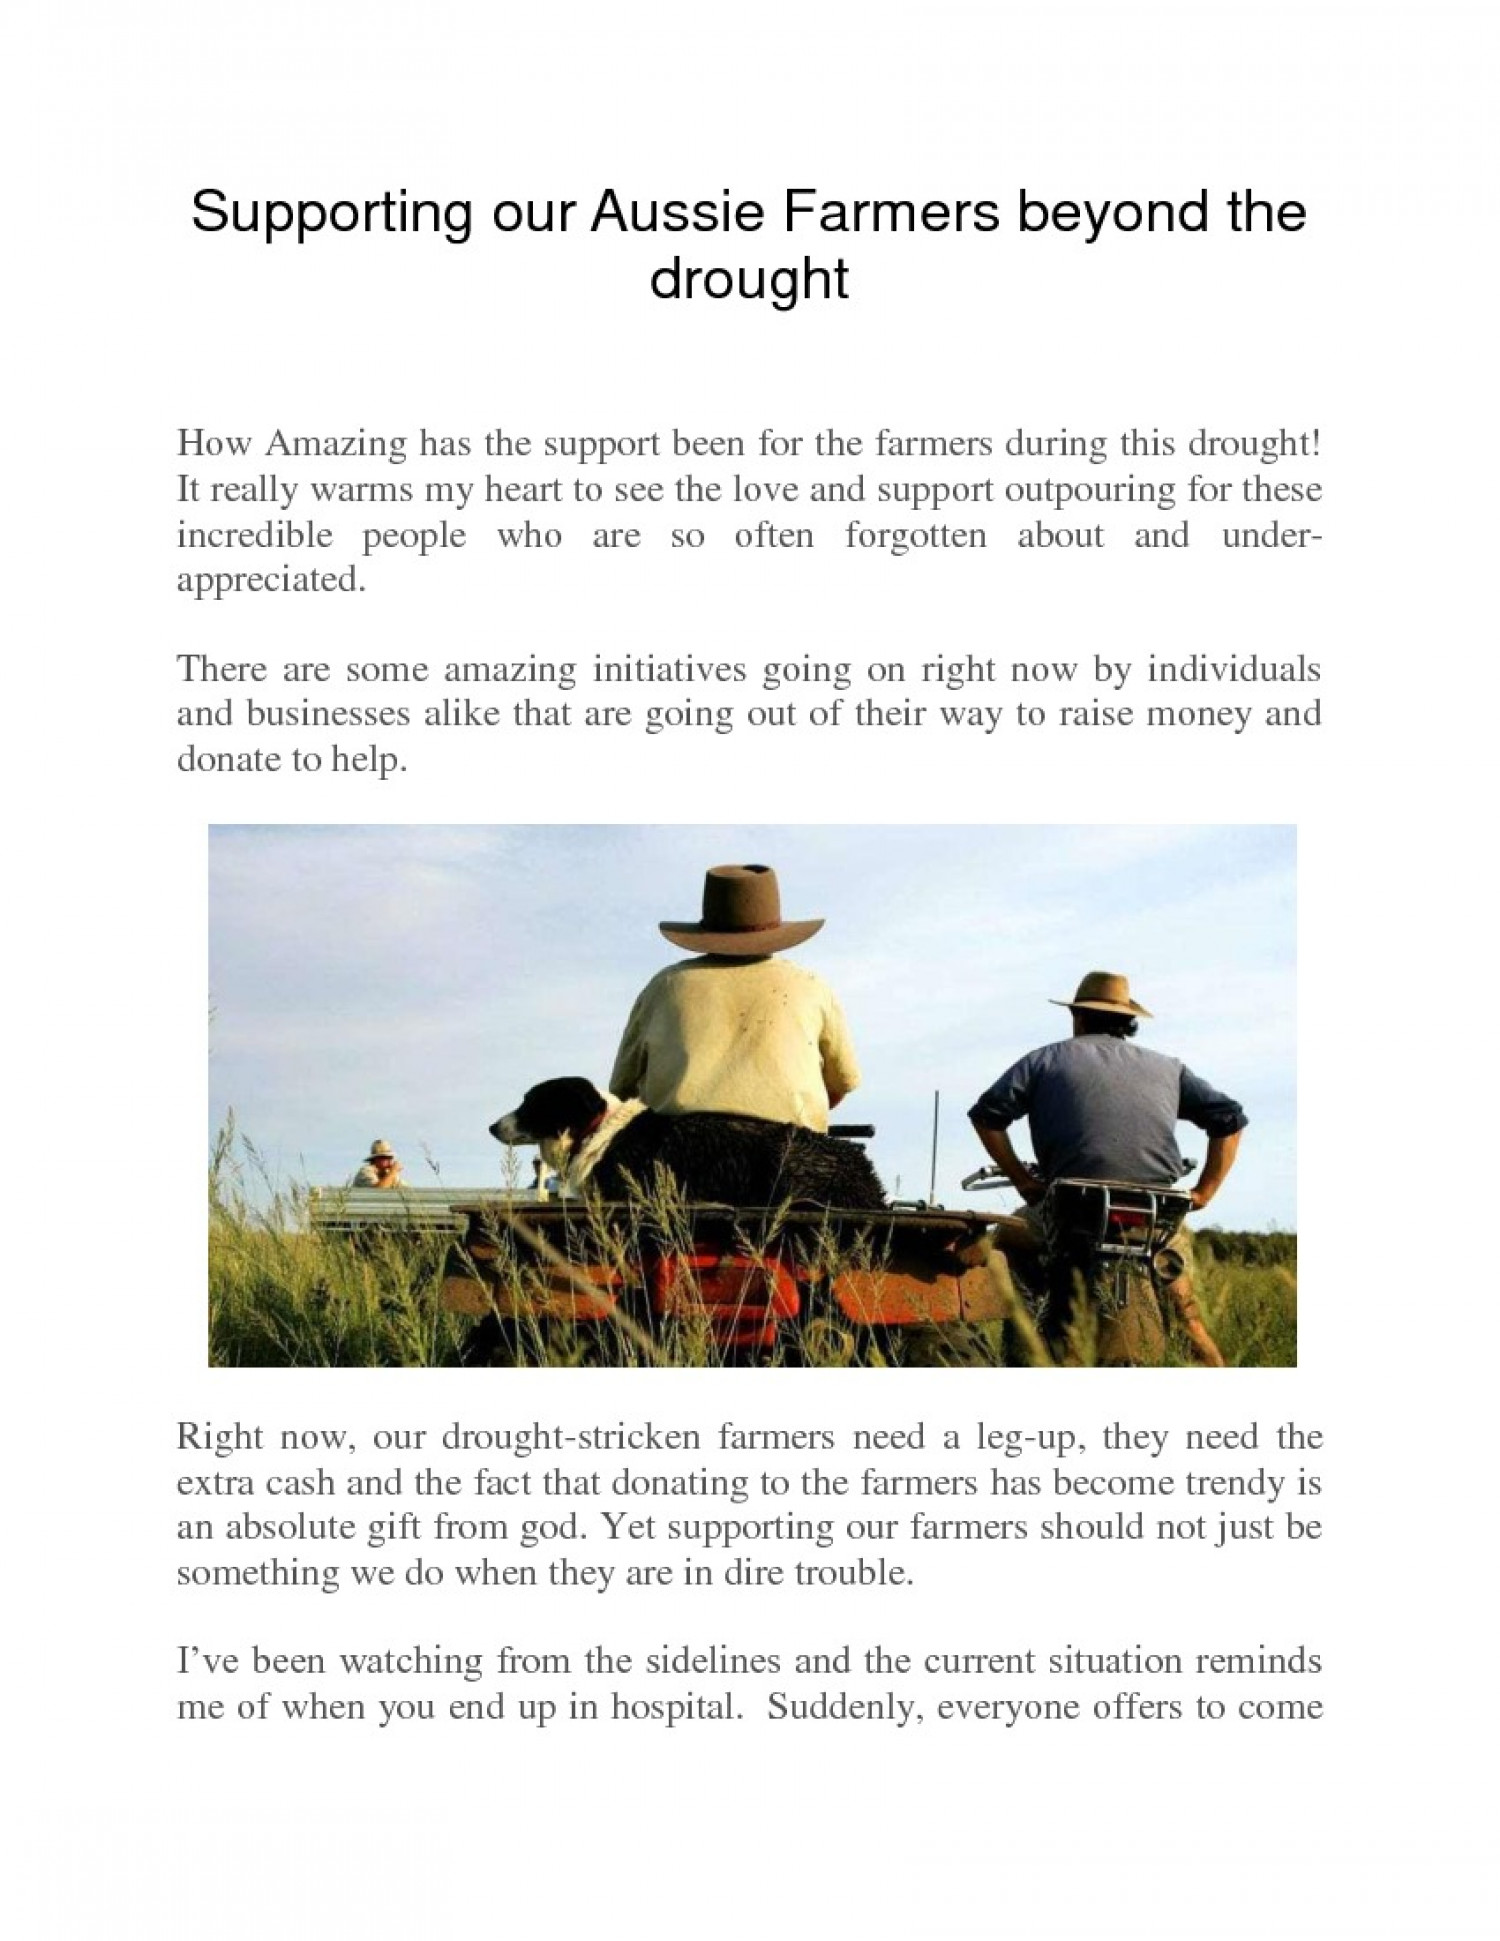 Supporting our Aussie Farmers beyond the drought Infographic